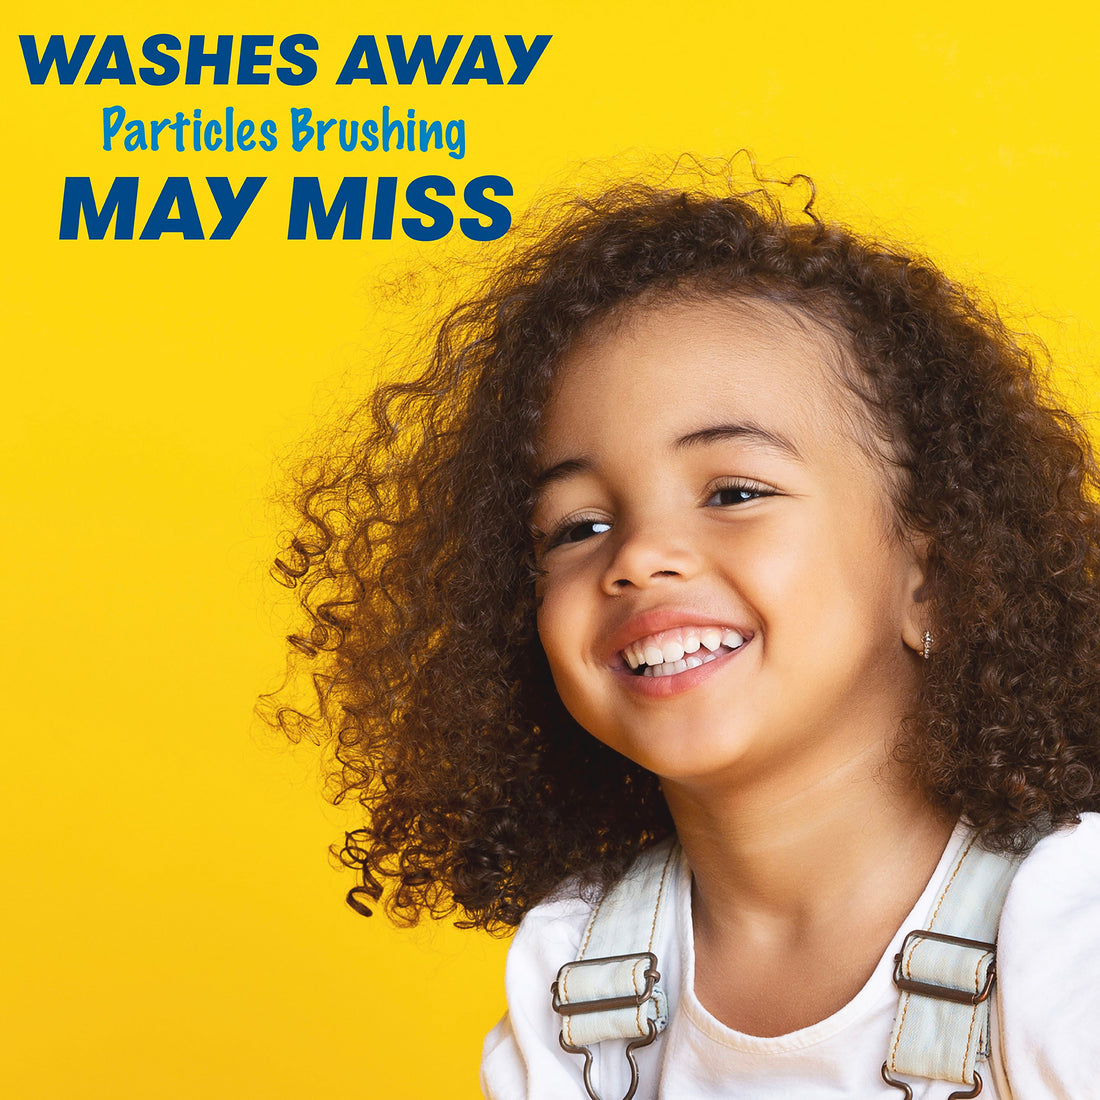 Child smiling. Washes away particles brushing may miss